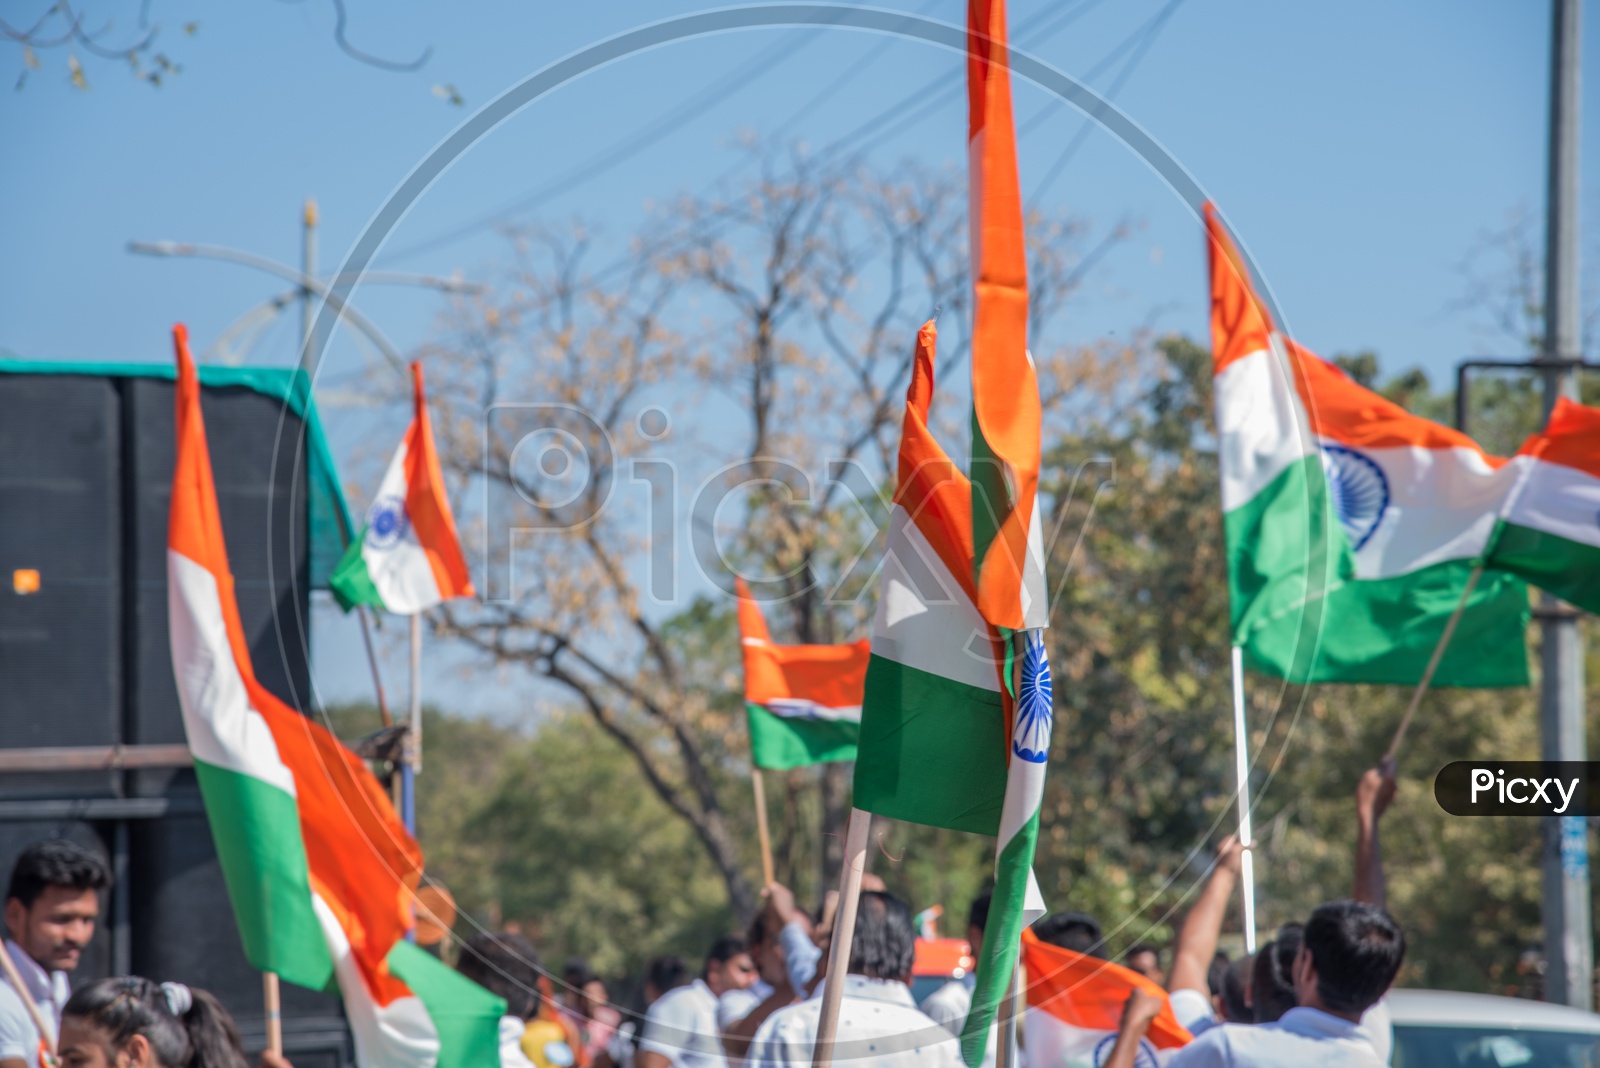 Indian Youth Waving The Indian National Tri Color Flag in a Road Rally on the Occasion Of  Republic Day Celebrations